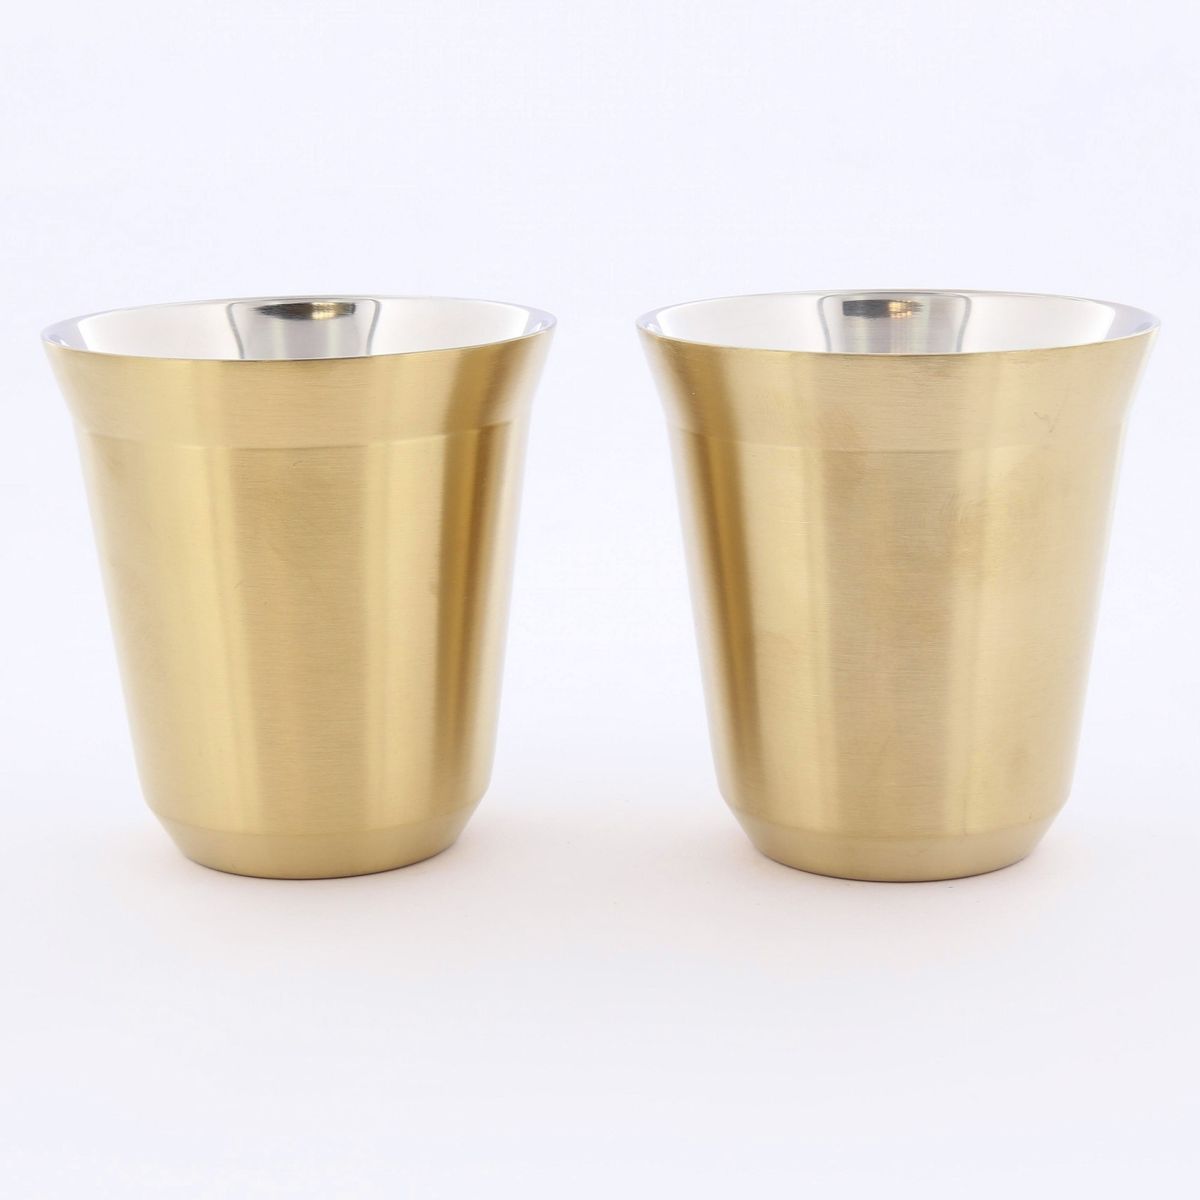 Rovatti Pola Stainless Steel Cup Gold 175ml